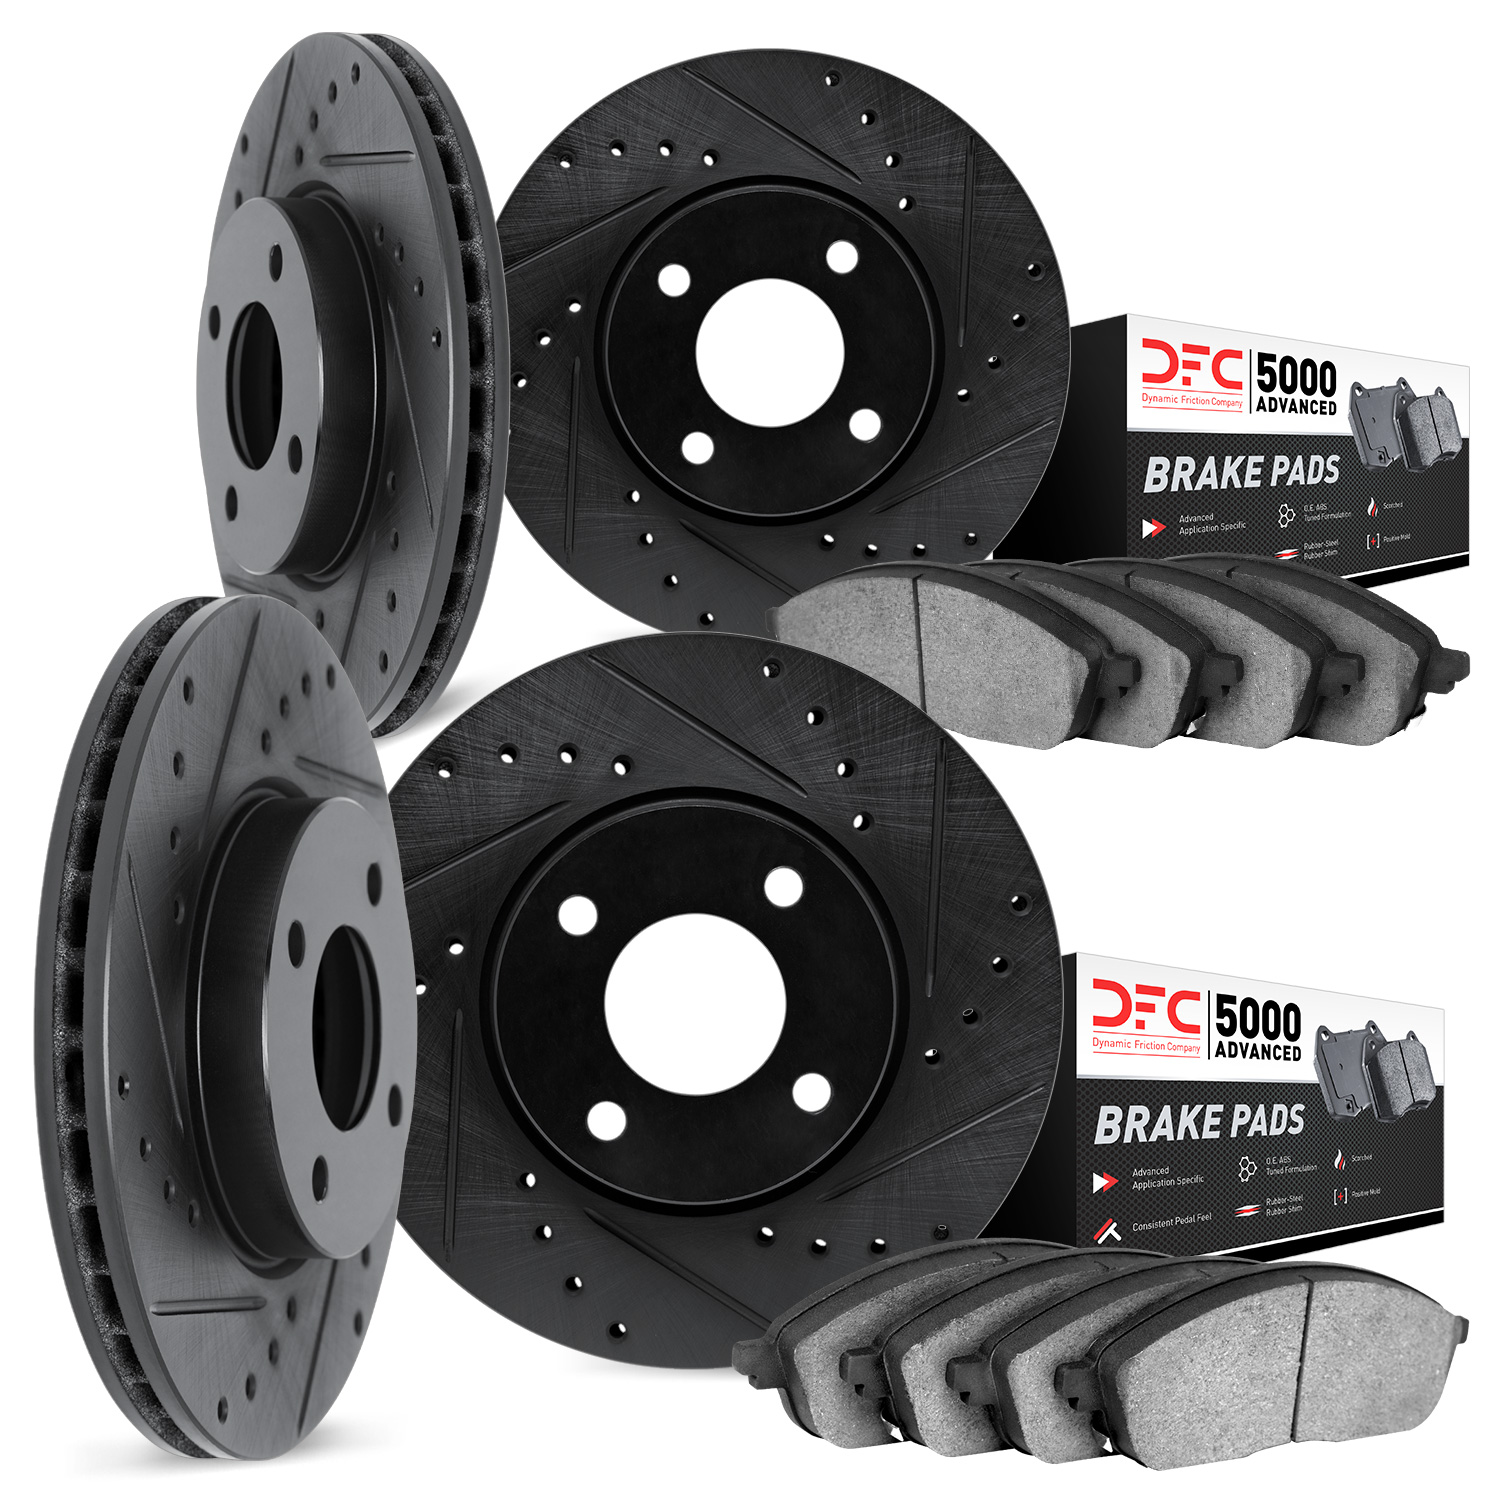 8504-76116 Drilled/Slotted Brake Rotors w/5000 Advanced Brake Pads Kit [Black], 1984-1984 Lexus/Toyota/Scion, Position: Front an